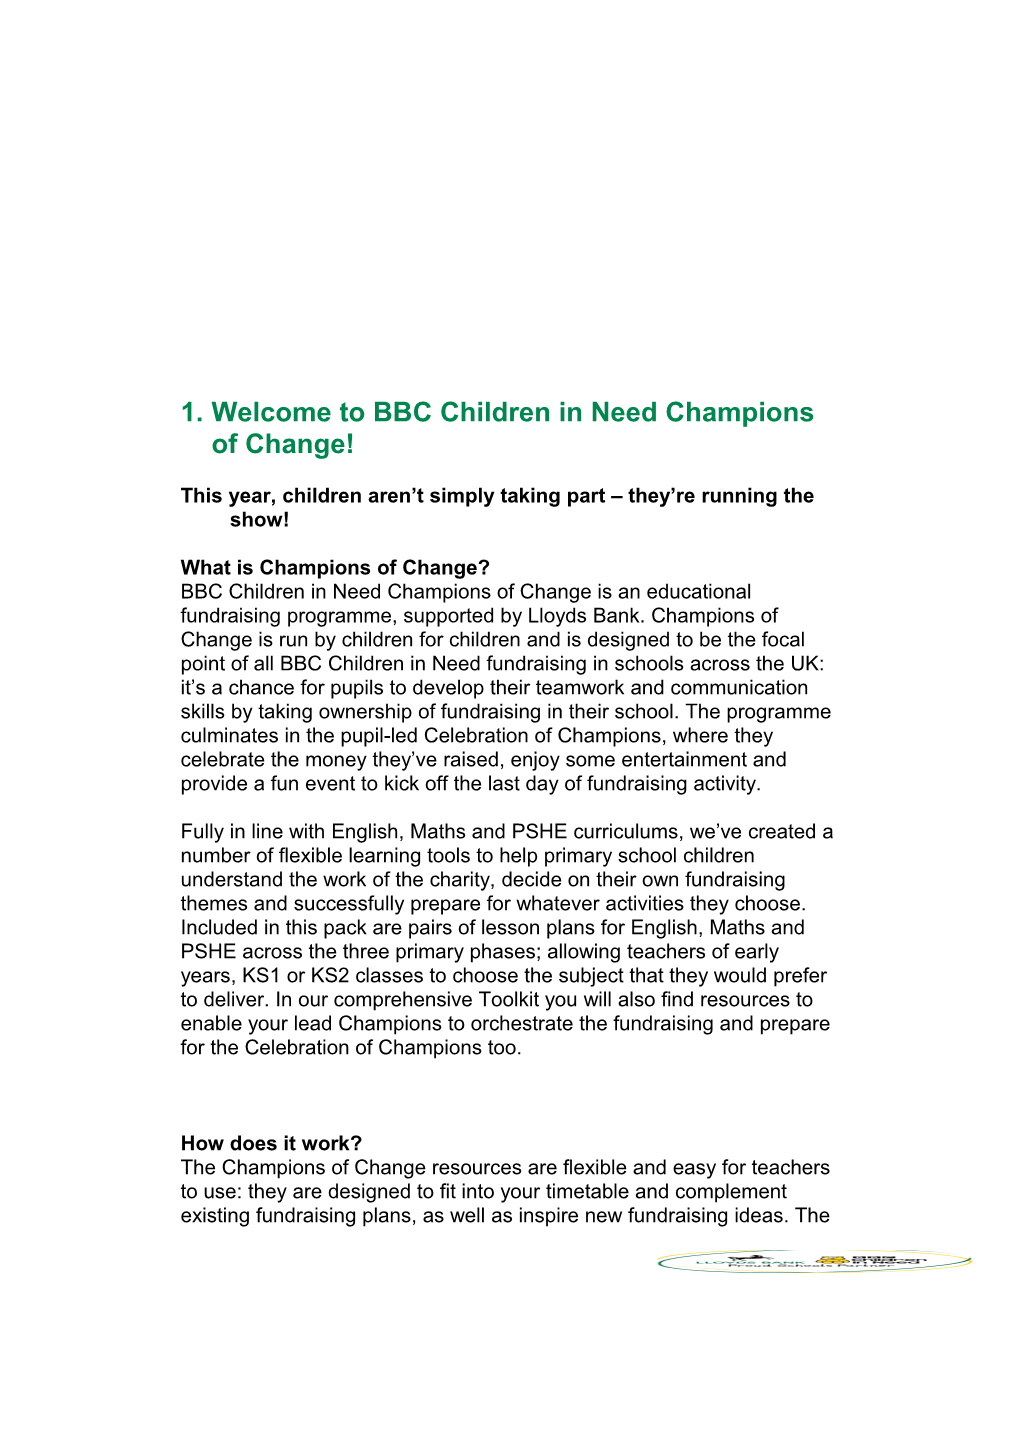 Welcome to BBC Children in Need Champions of Change!